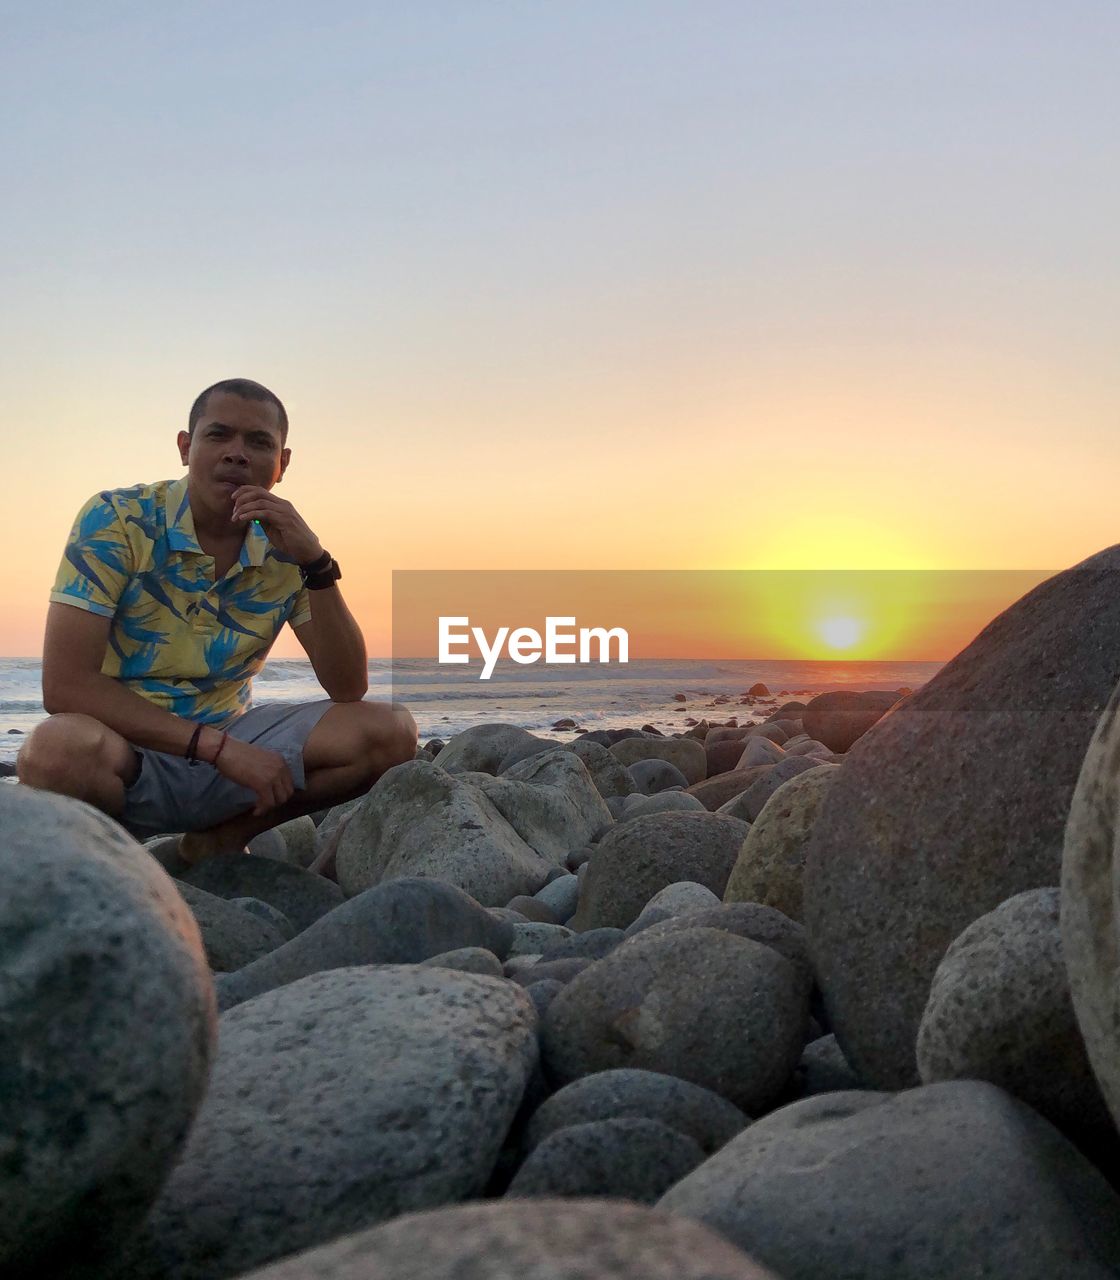 Man crouching on rocks against sea during sunset